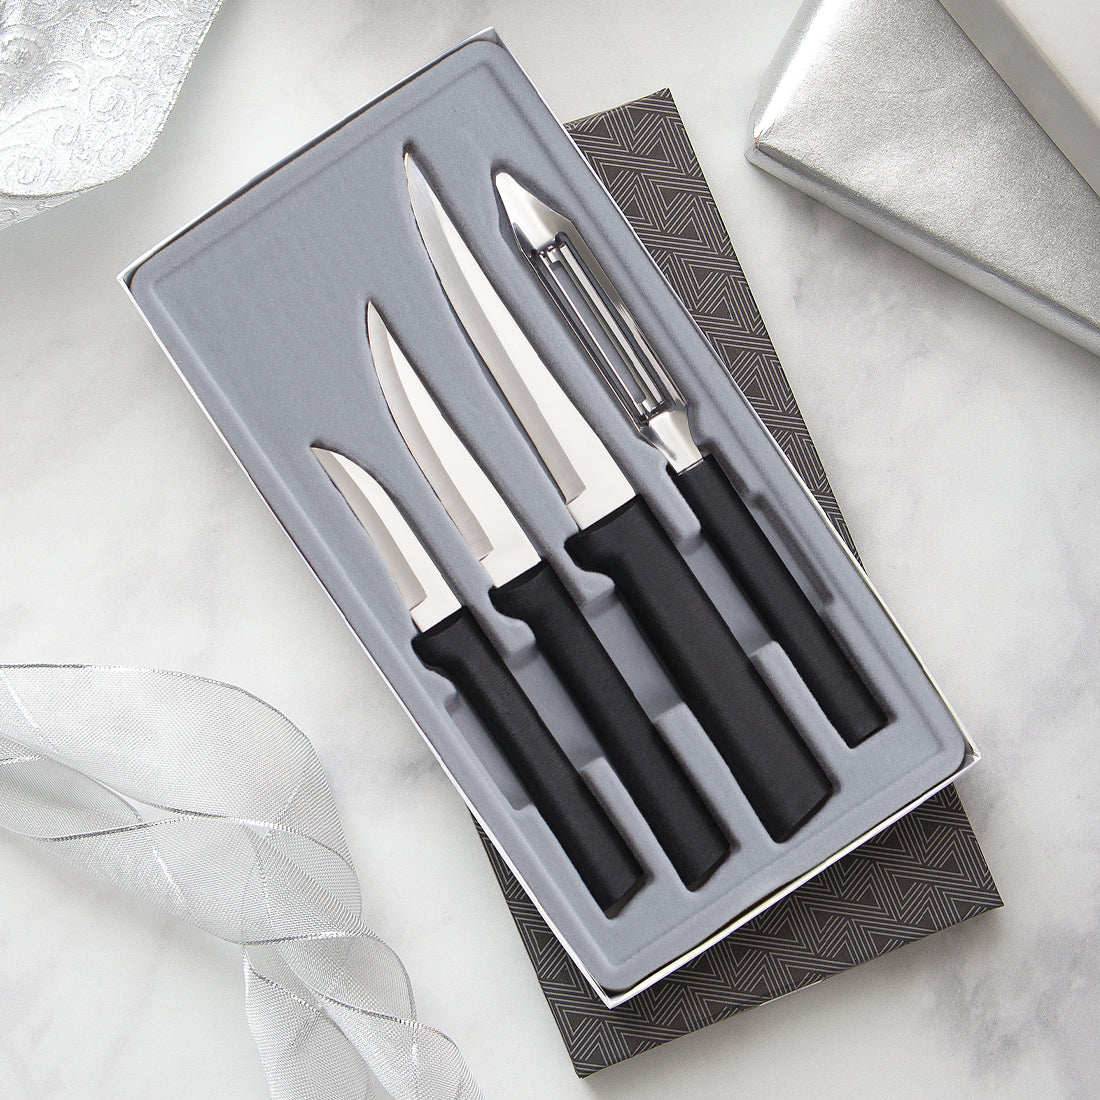  Rada Cutlery Cook's Starter Kit 4-Piece Set – Includes Super  Parer, Cook's Knife, Cook's Utility Knife With Brushed Aluminum Knife  Handles Plus Quick Edge Knife Sharpener: Home & Kitchen